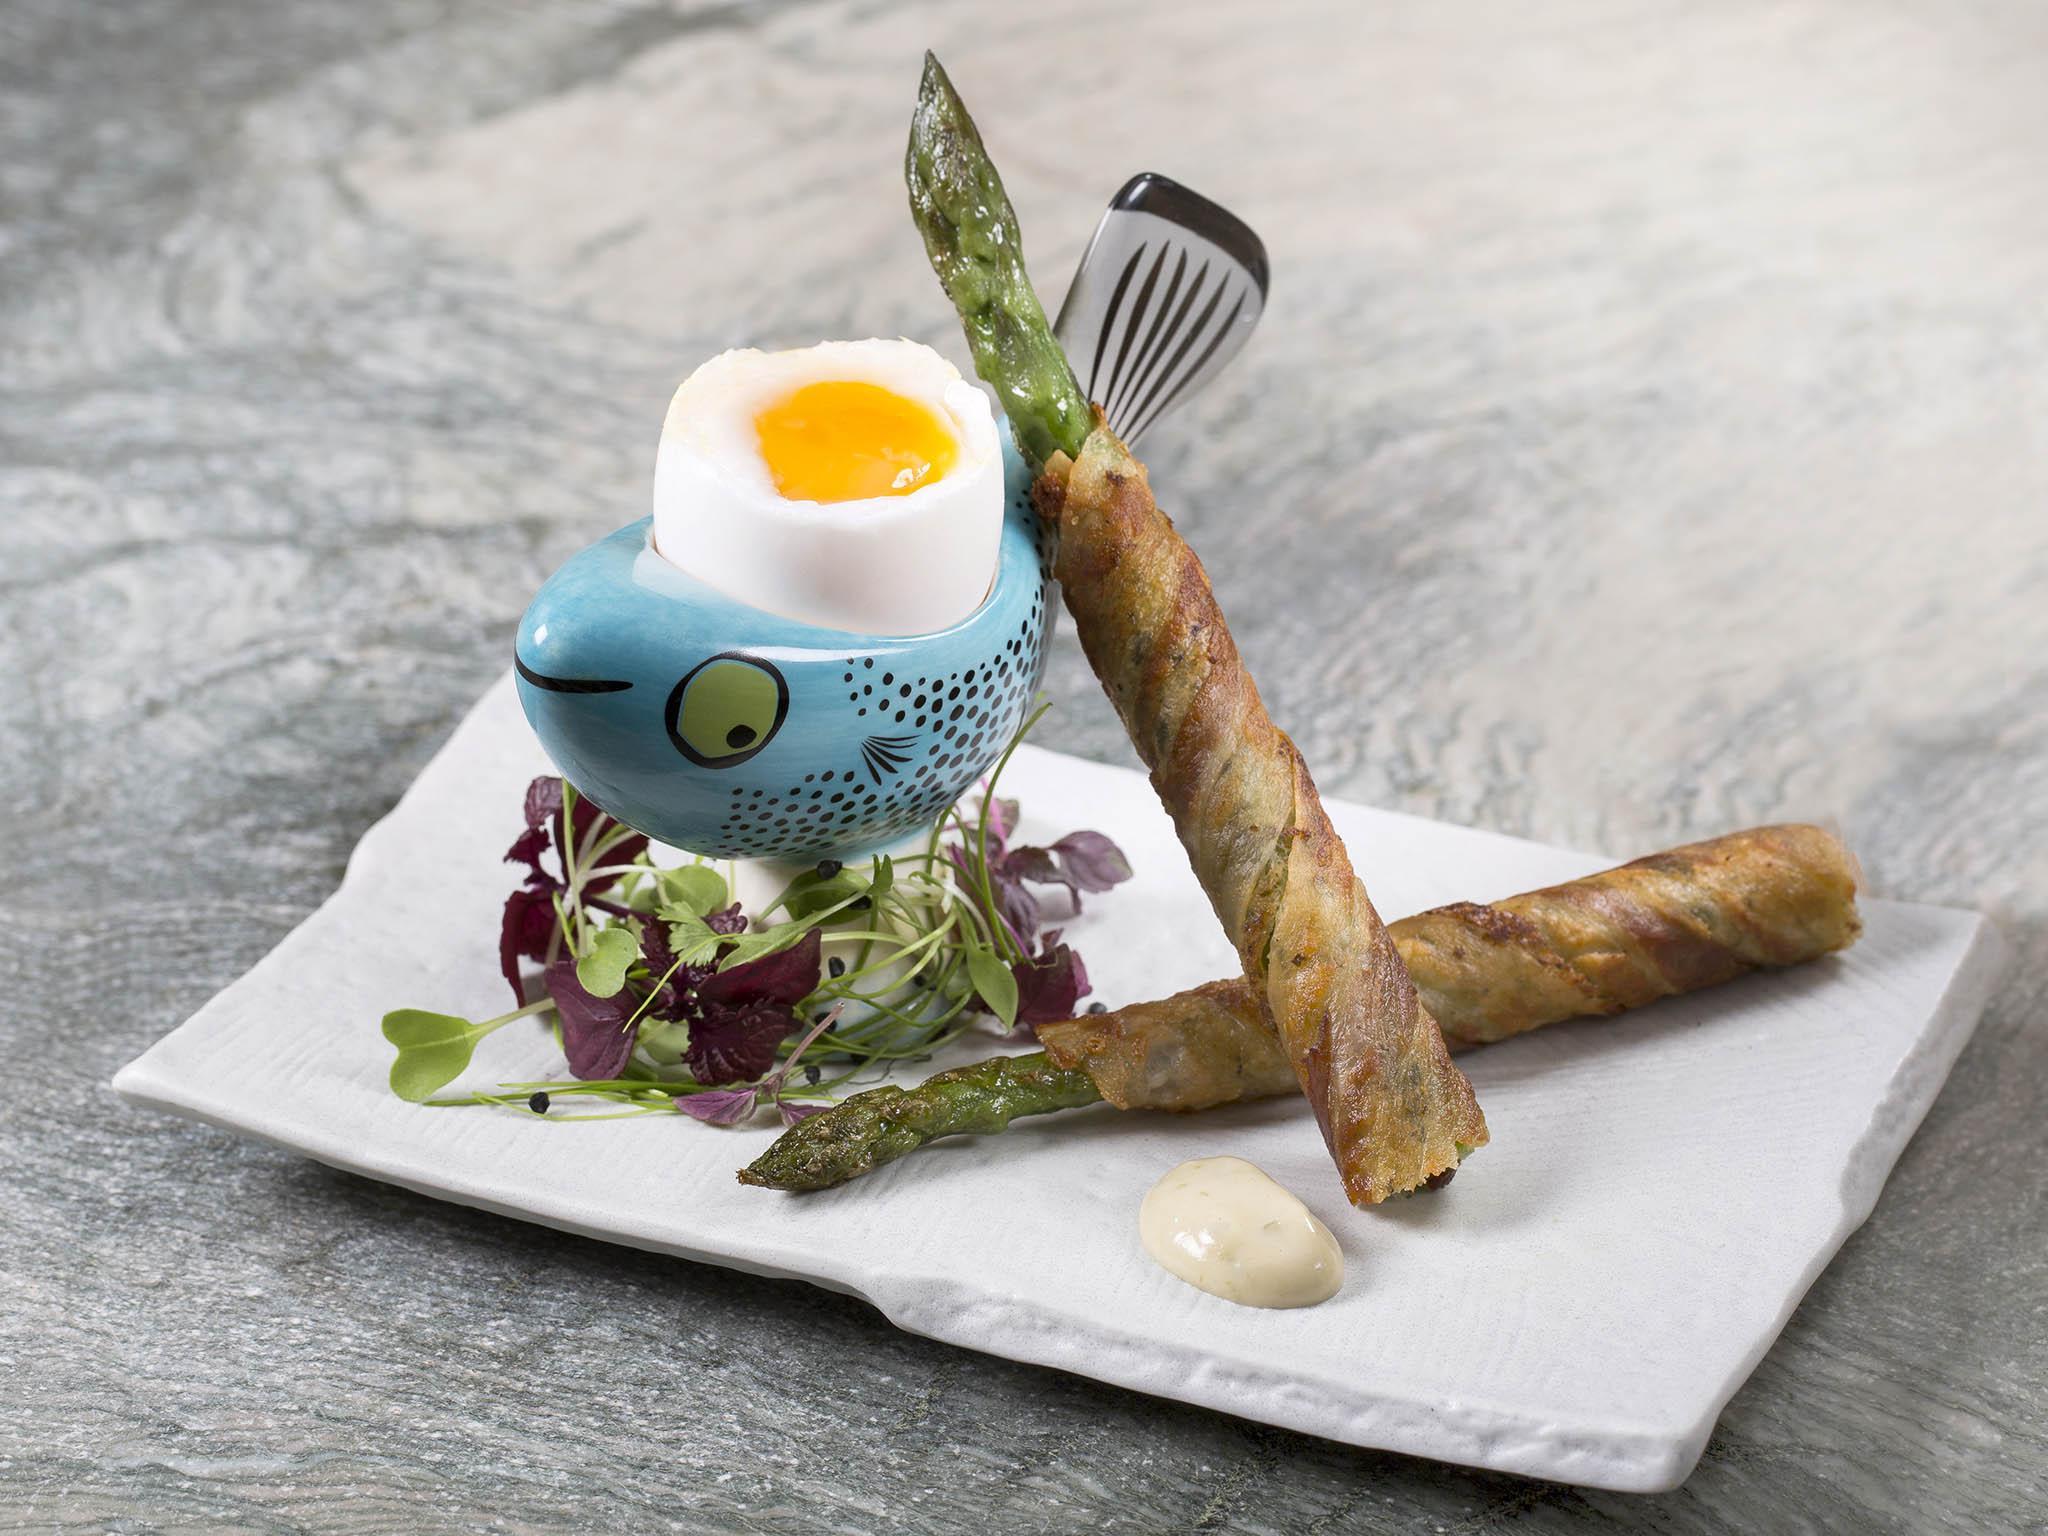 Asparagus soldiers wrapped in crispy bacon are a tasty accompaniment to a soft boiled egg